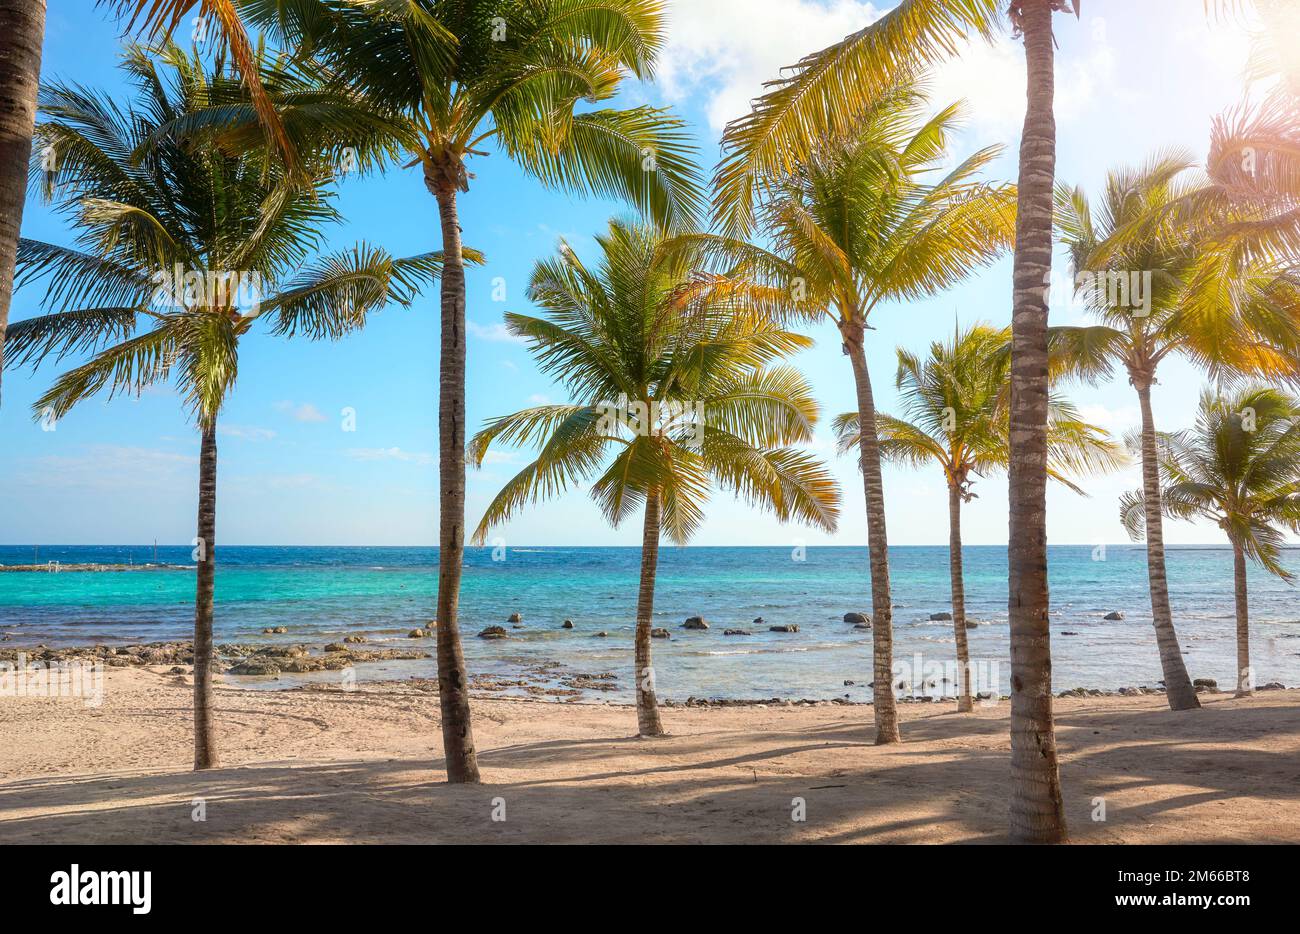 Beautiful Caribbean beach with coconut palm trees on a sunny day. Stock Photo